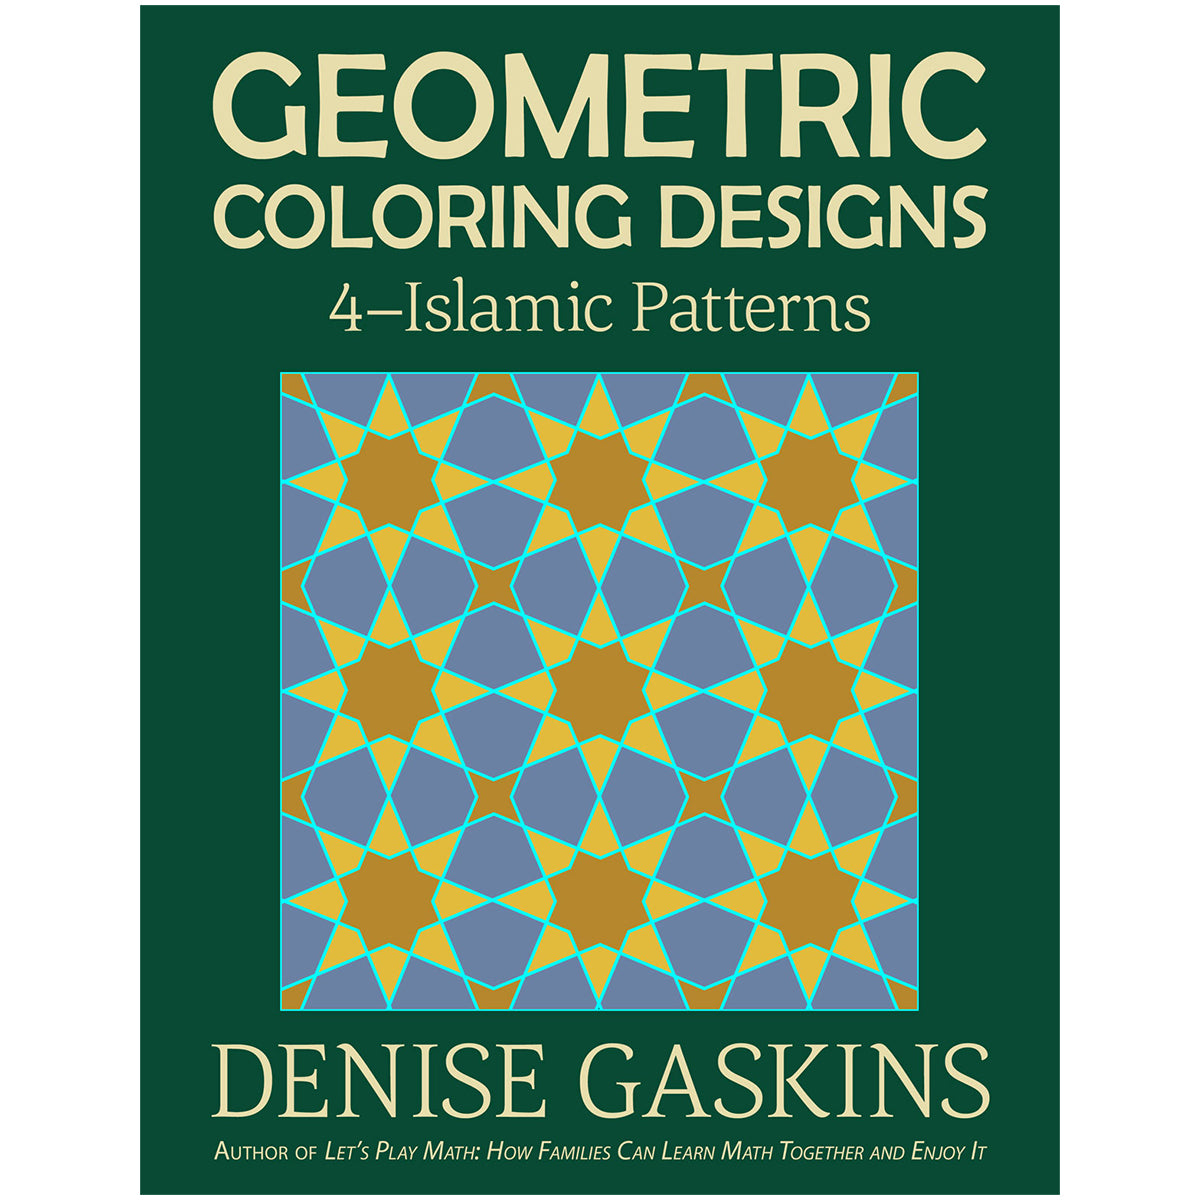 Islamic Patterns geometric coloring designs math art printable activity book by Denise Gaskins